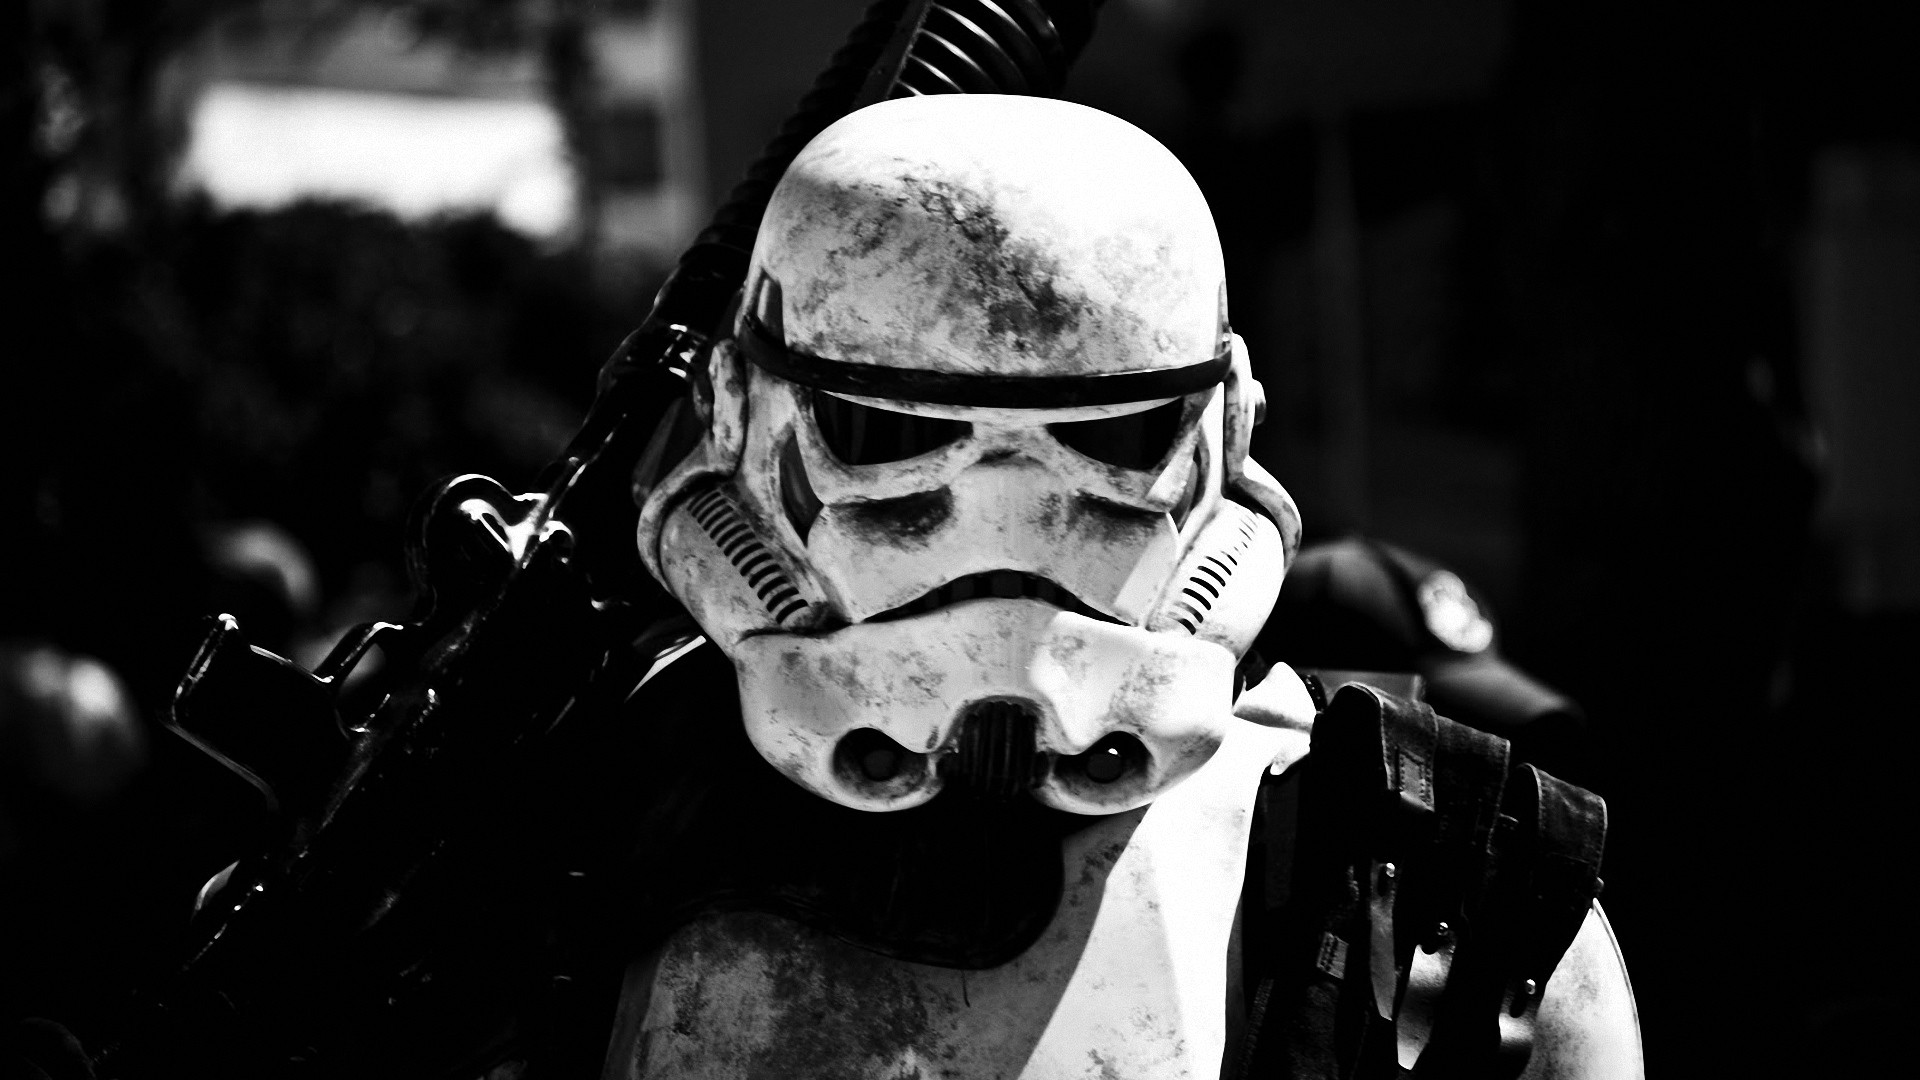 General 1920x1080 monochrome black white stormtrooper Imperial Forces Star Wars movie characters